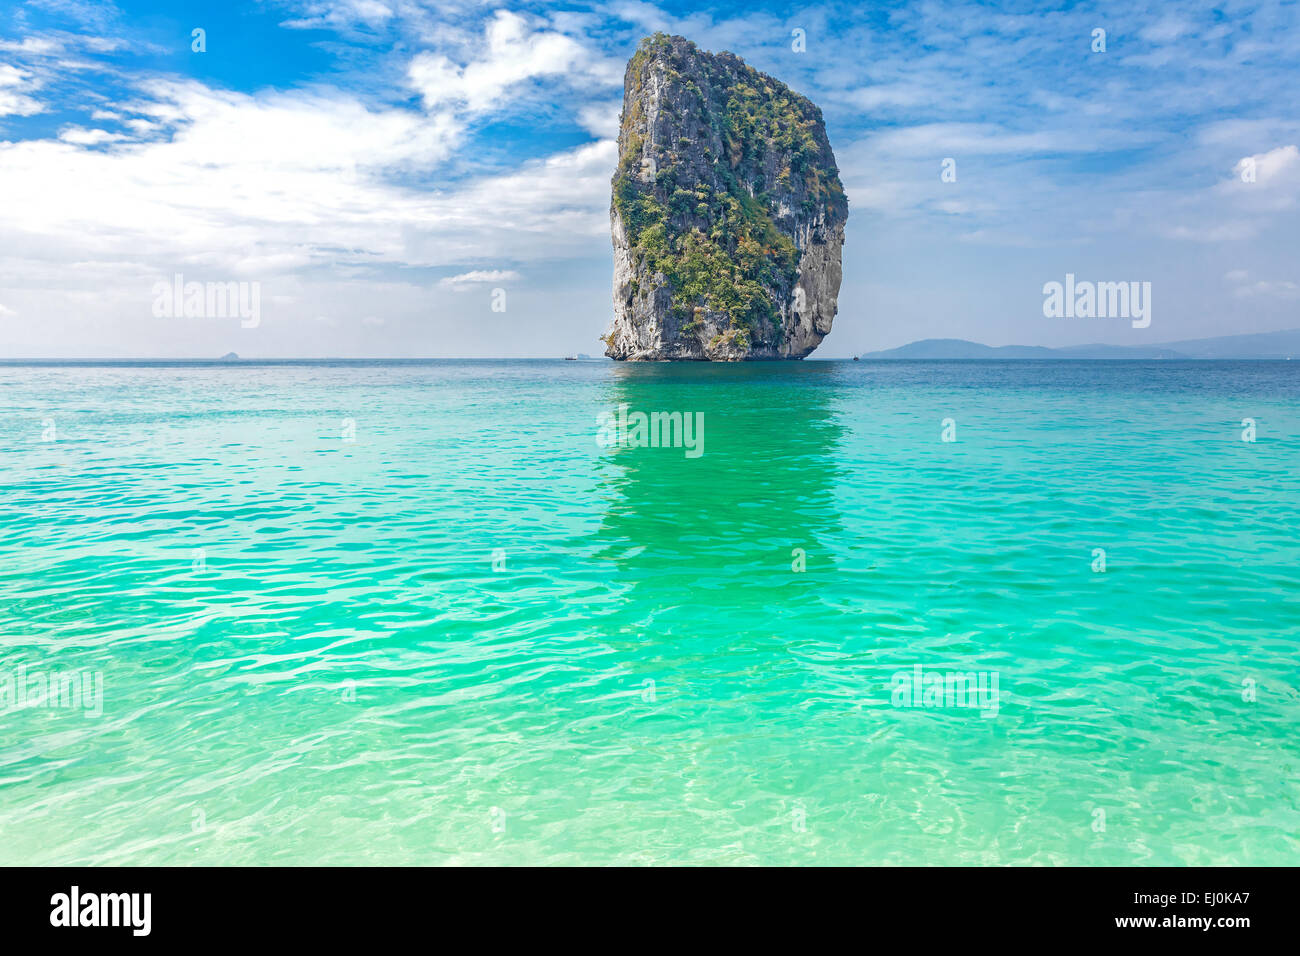 Tropical island located in Krabi province, Thailand. Stock Photo